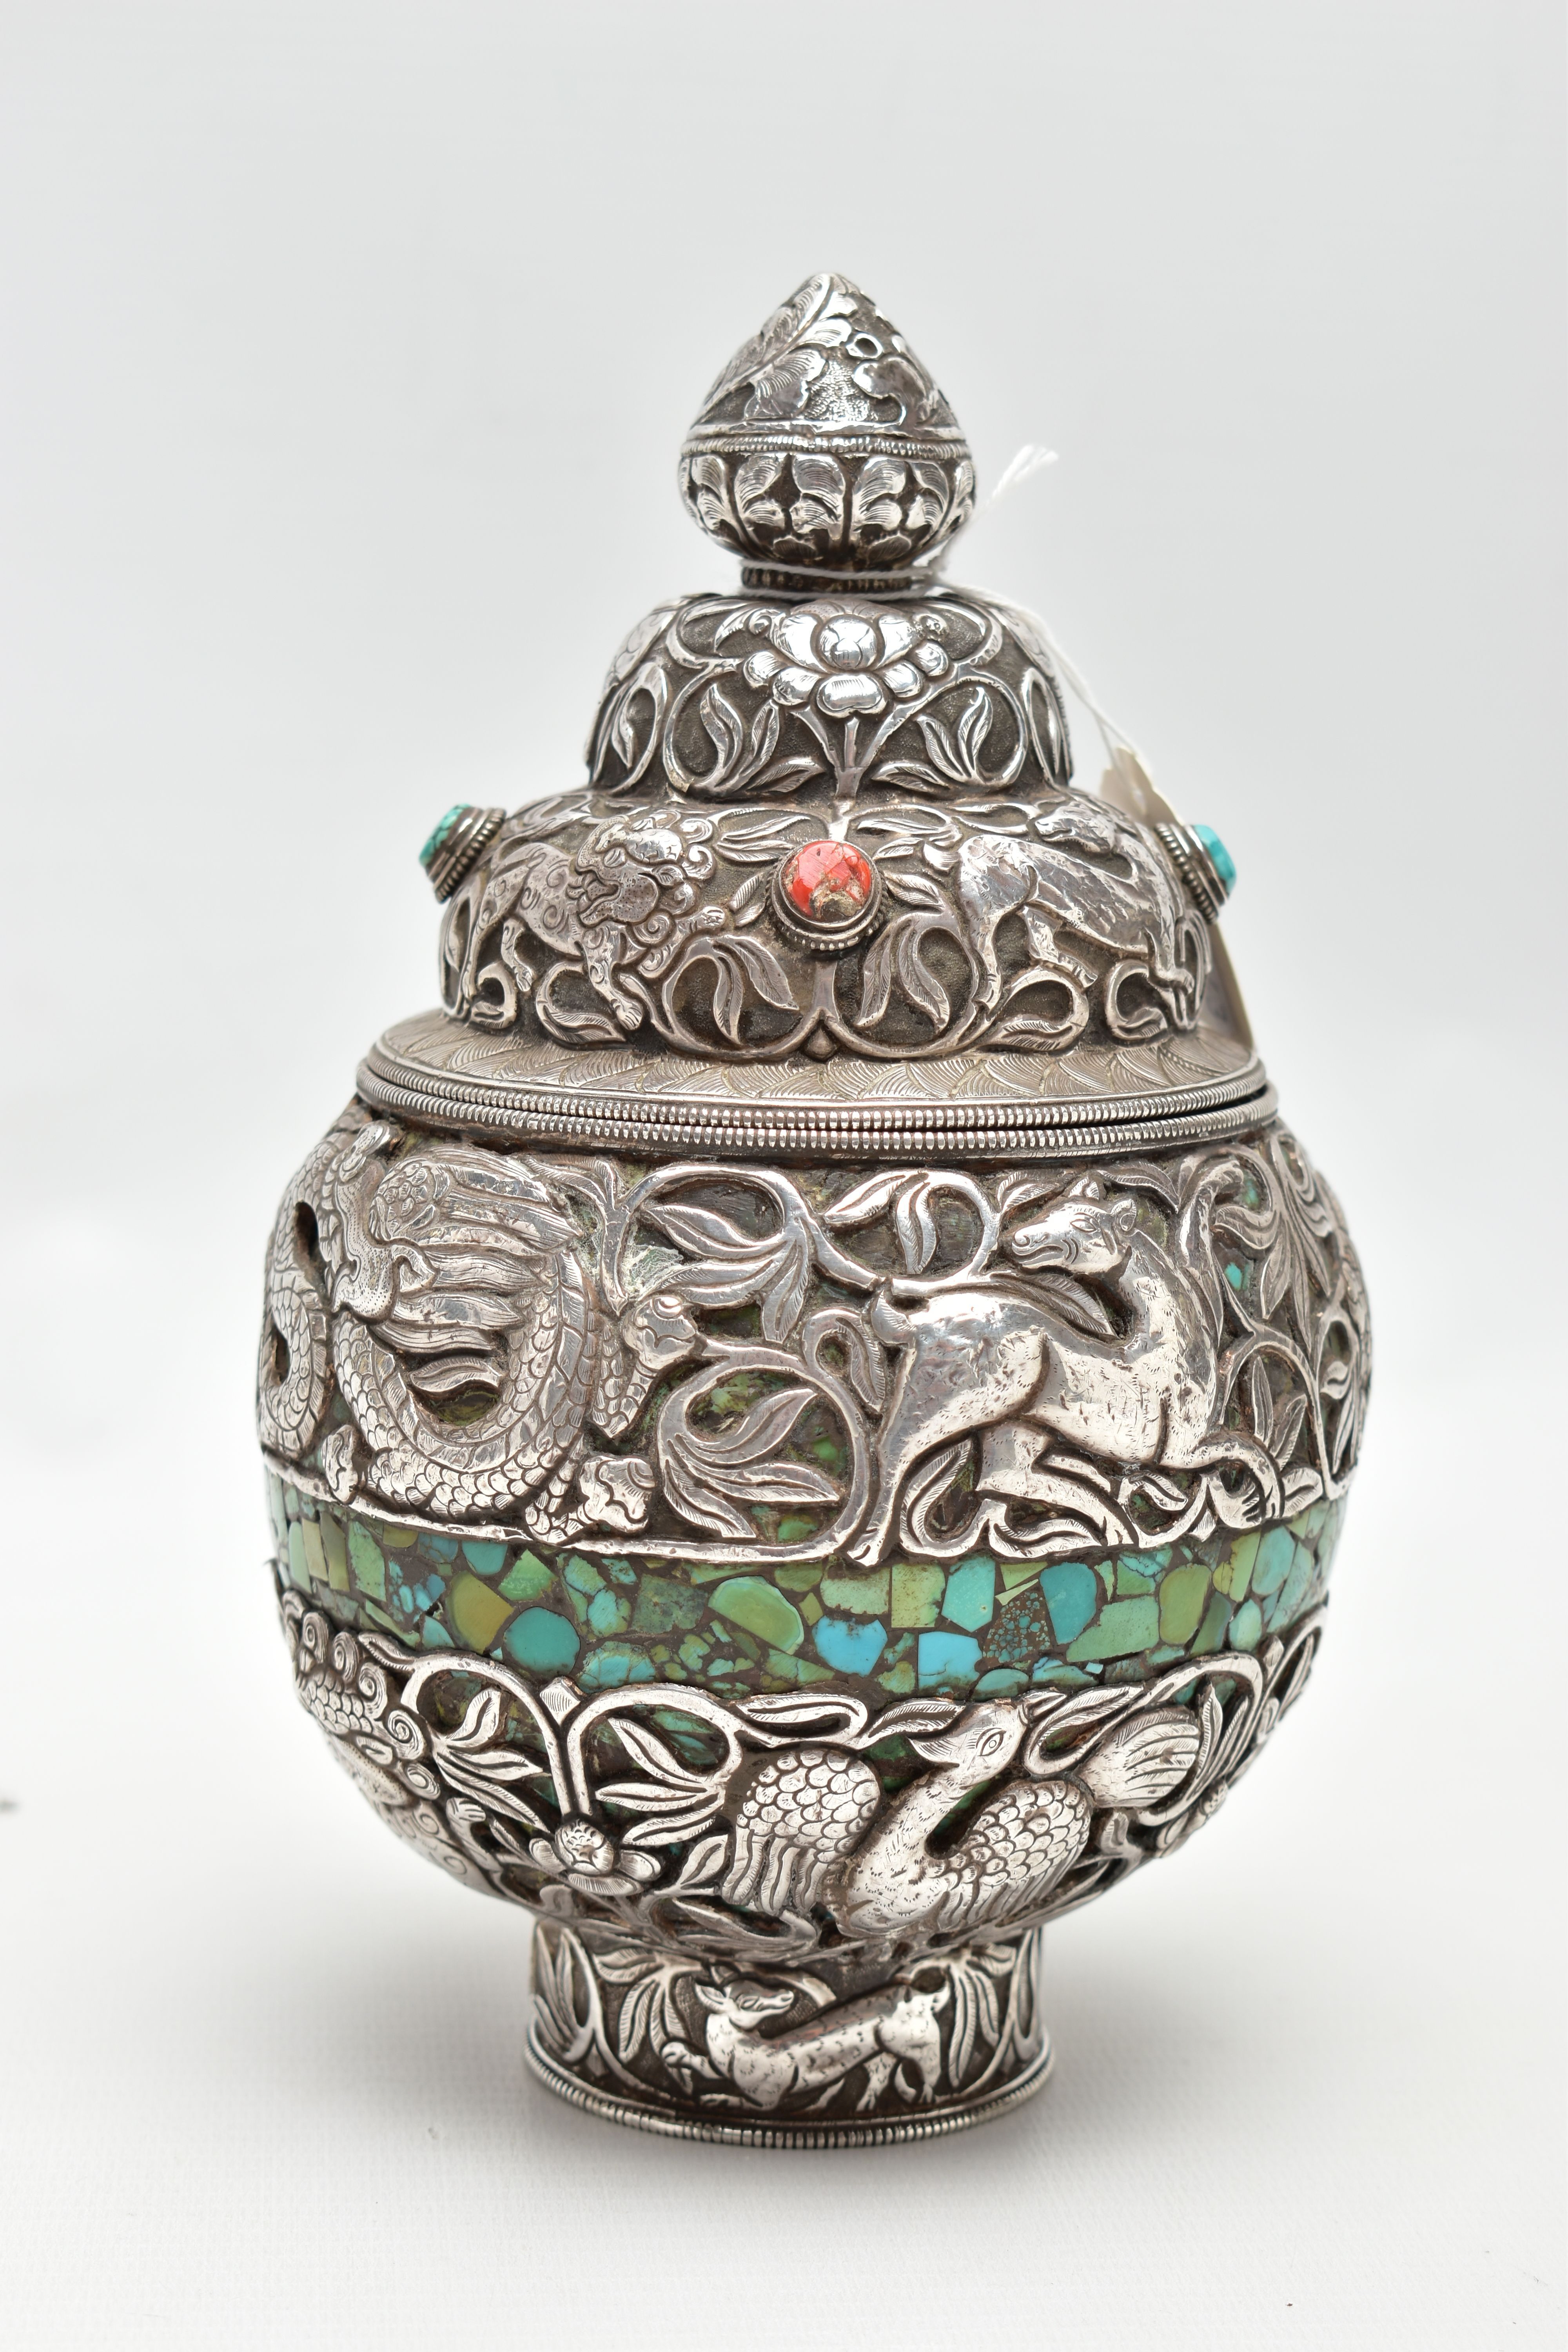 A WHITE METAL DECORATIVE VASE, detailed with tigers, lions, dragons and other animals within a